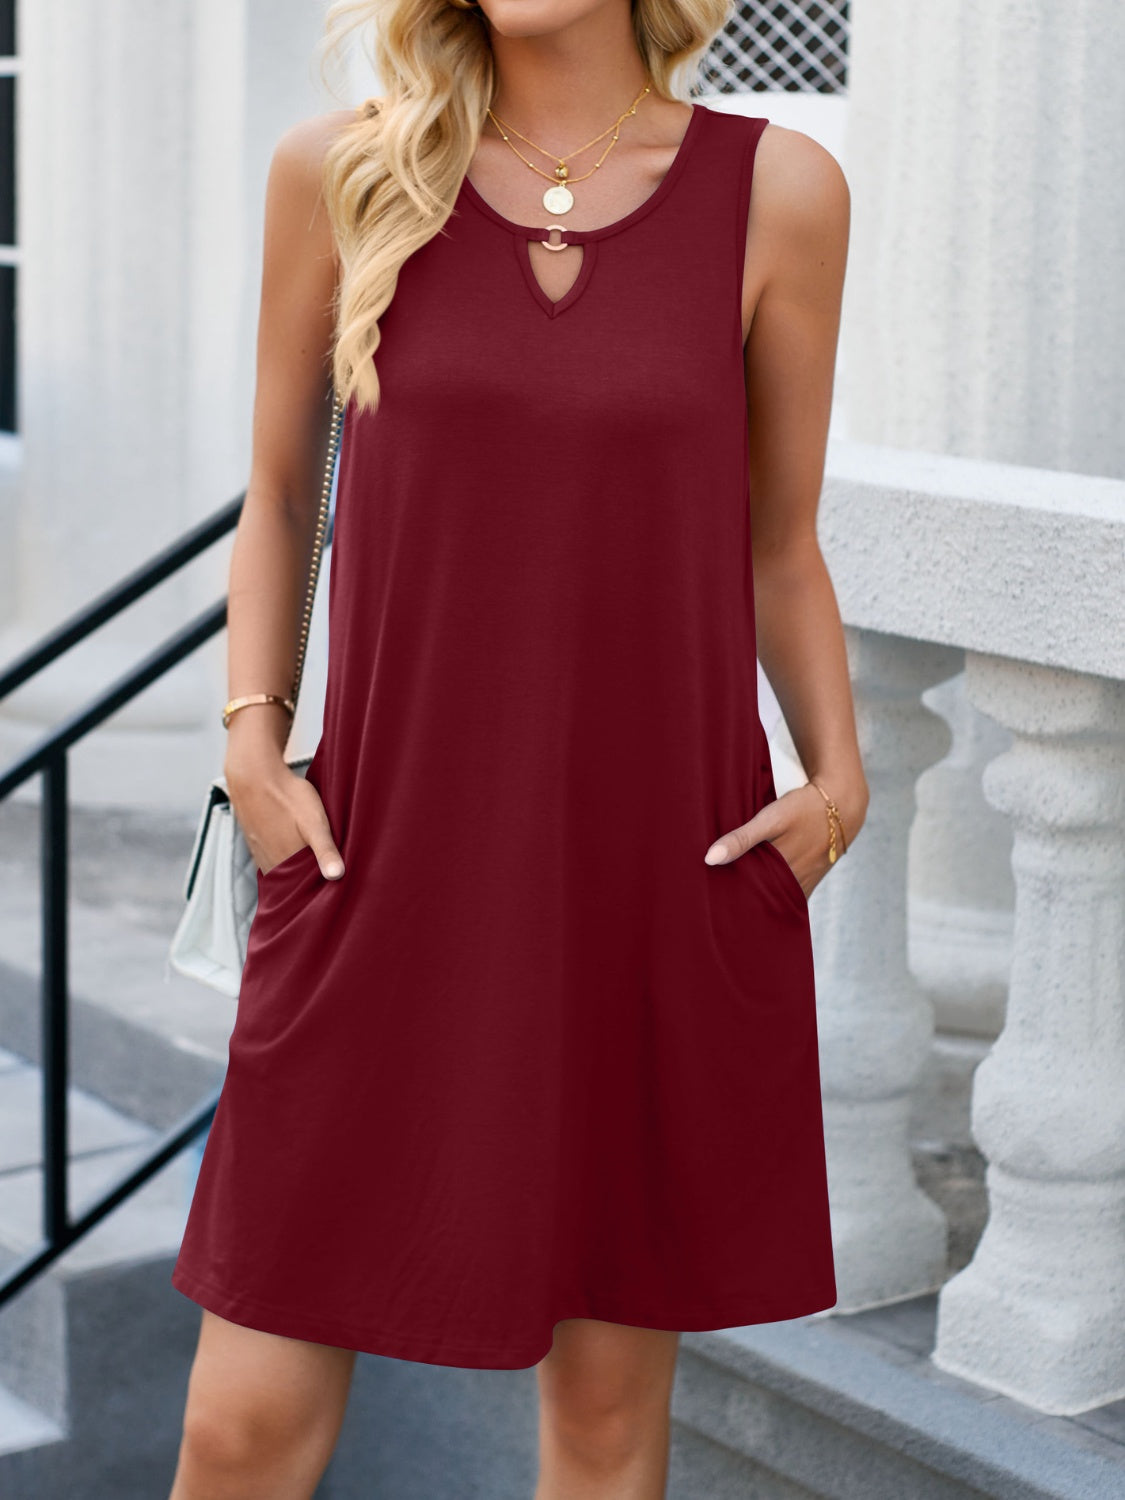 Elevate your wardrobe with our chic Cutout Round Neck Dress - perfect for any occasion, available in teal, wine, navy, and black.